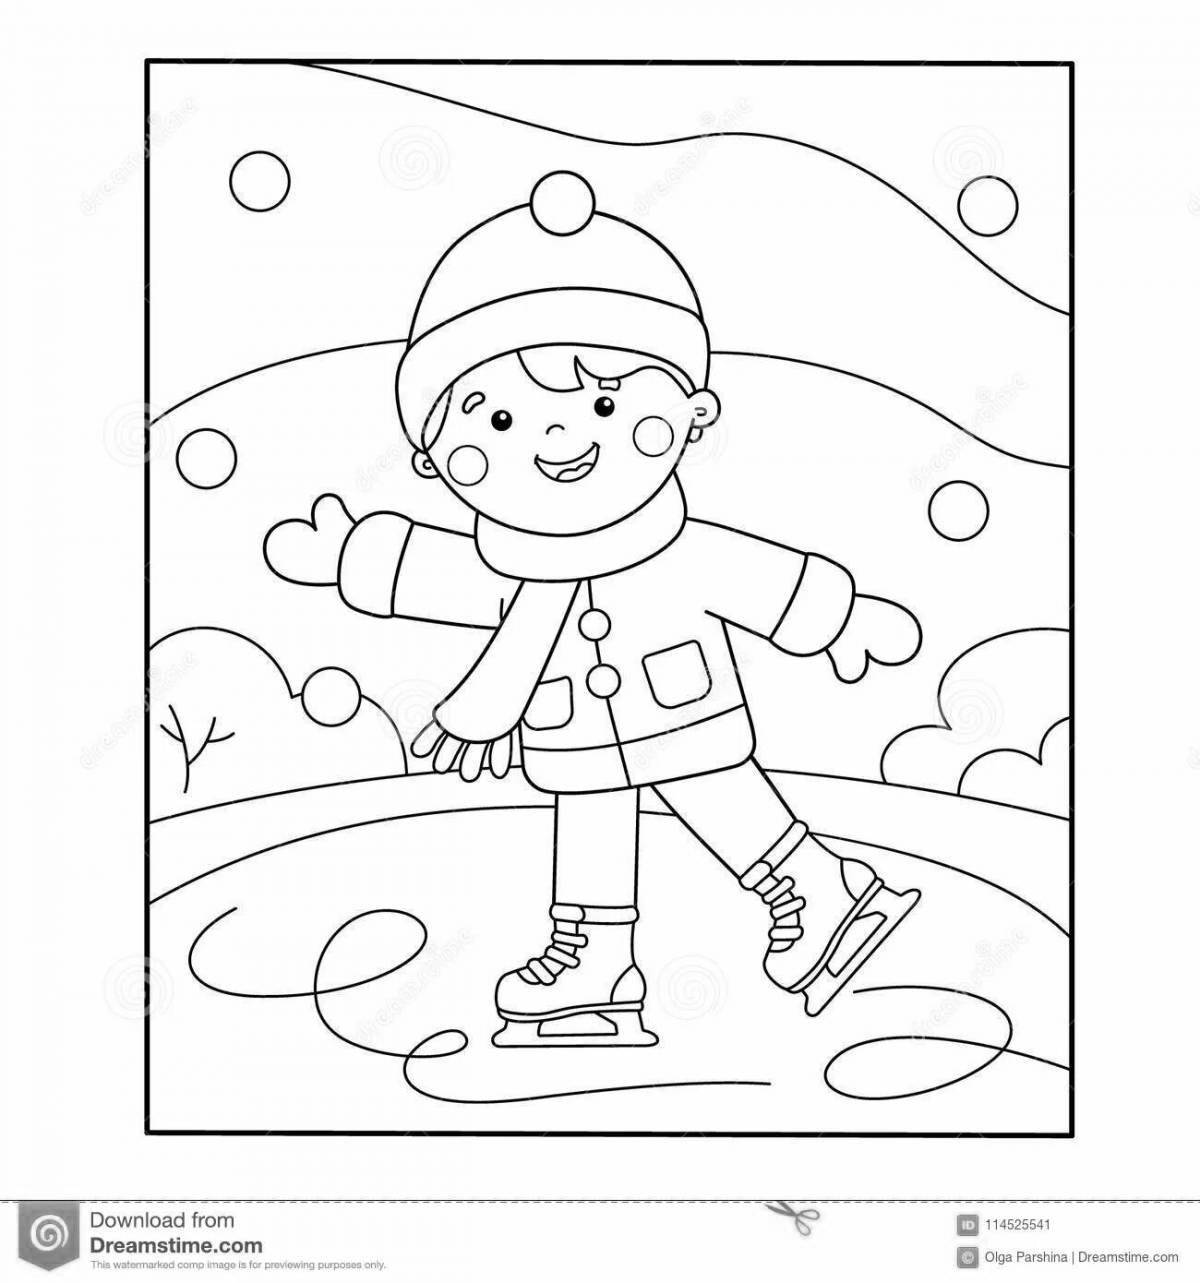 Animated kindergarten winter sports coloring page